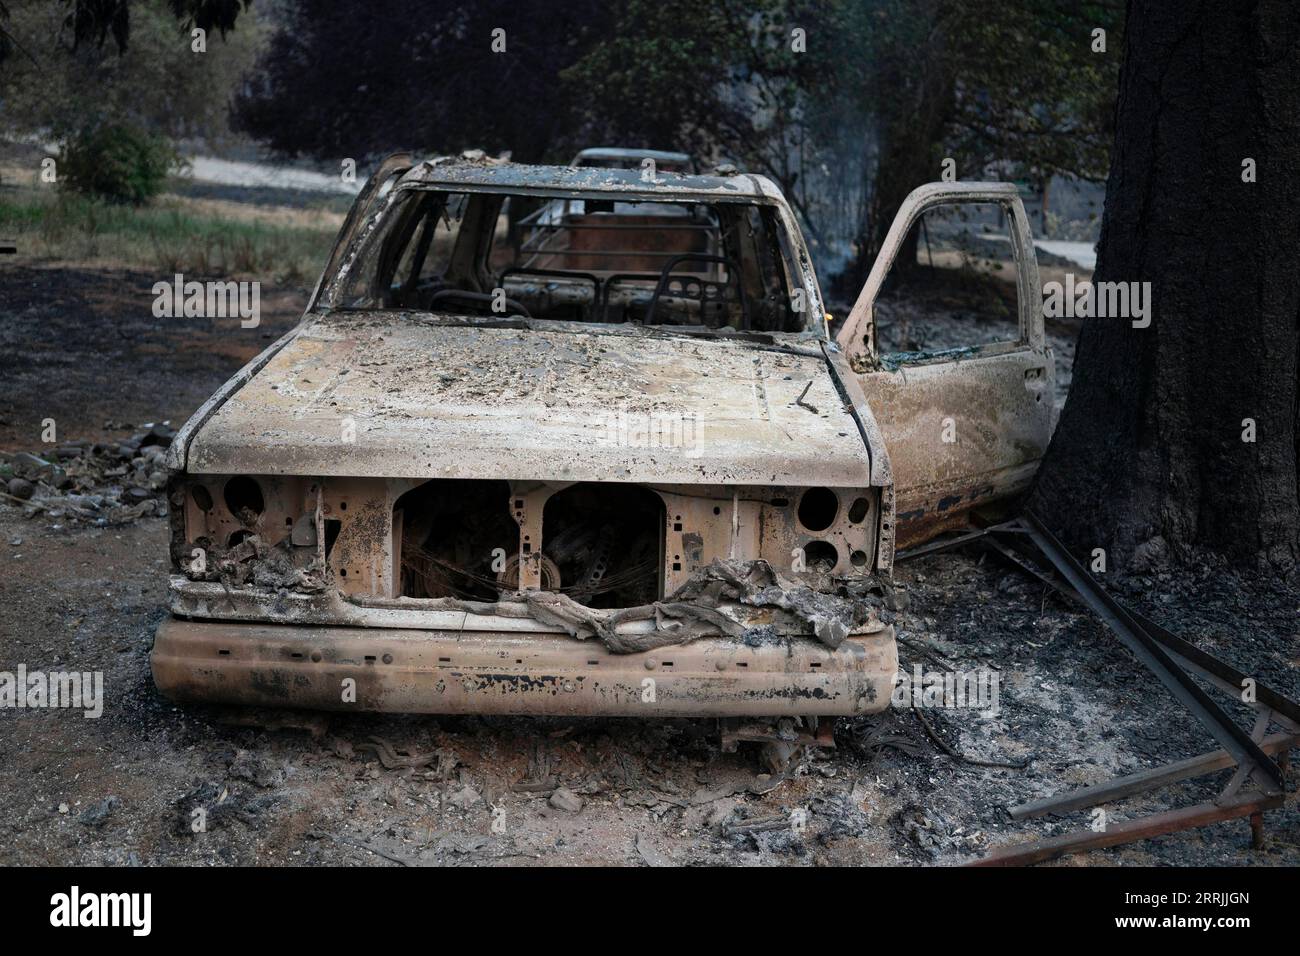 220726 -- MARIPOSA, July 26, 2022 -- Photo taken on July 25, 2022 shows a vehicle burned in a wildfire in Mariposa County in central California, the United States. Driven by hot, dry weather and drought conditions, the blaze began on Friday afternoon in Mariposa County in central California. It rapidly grows to be one of the largest wildfires in the state so far this year. Photo by /Xinhua U.S.-CALIFORNIA-WILDFIRE LixJianguo PUBLICATIONxNOTxINxCHN Stock Photo